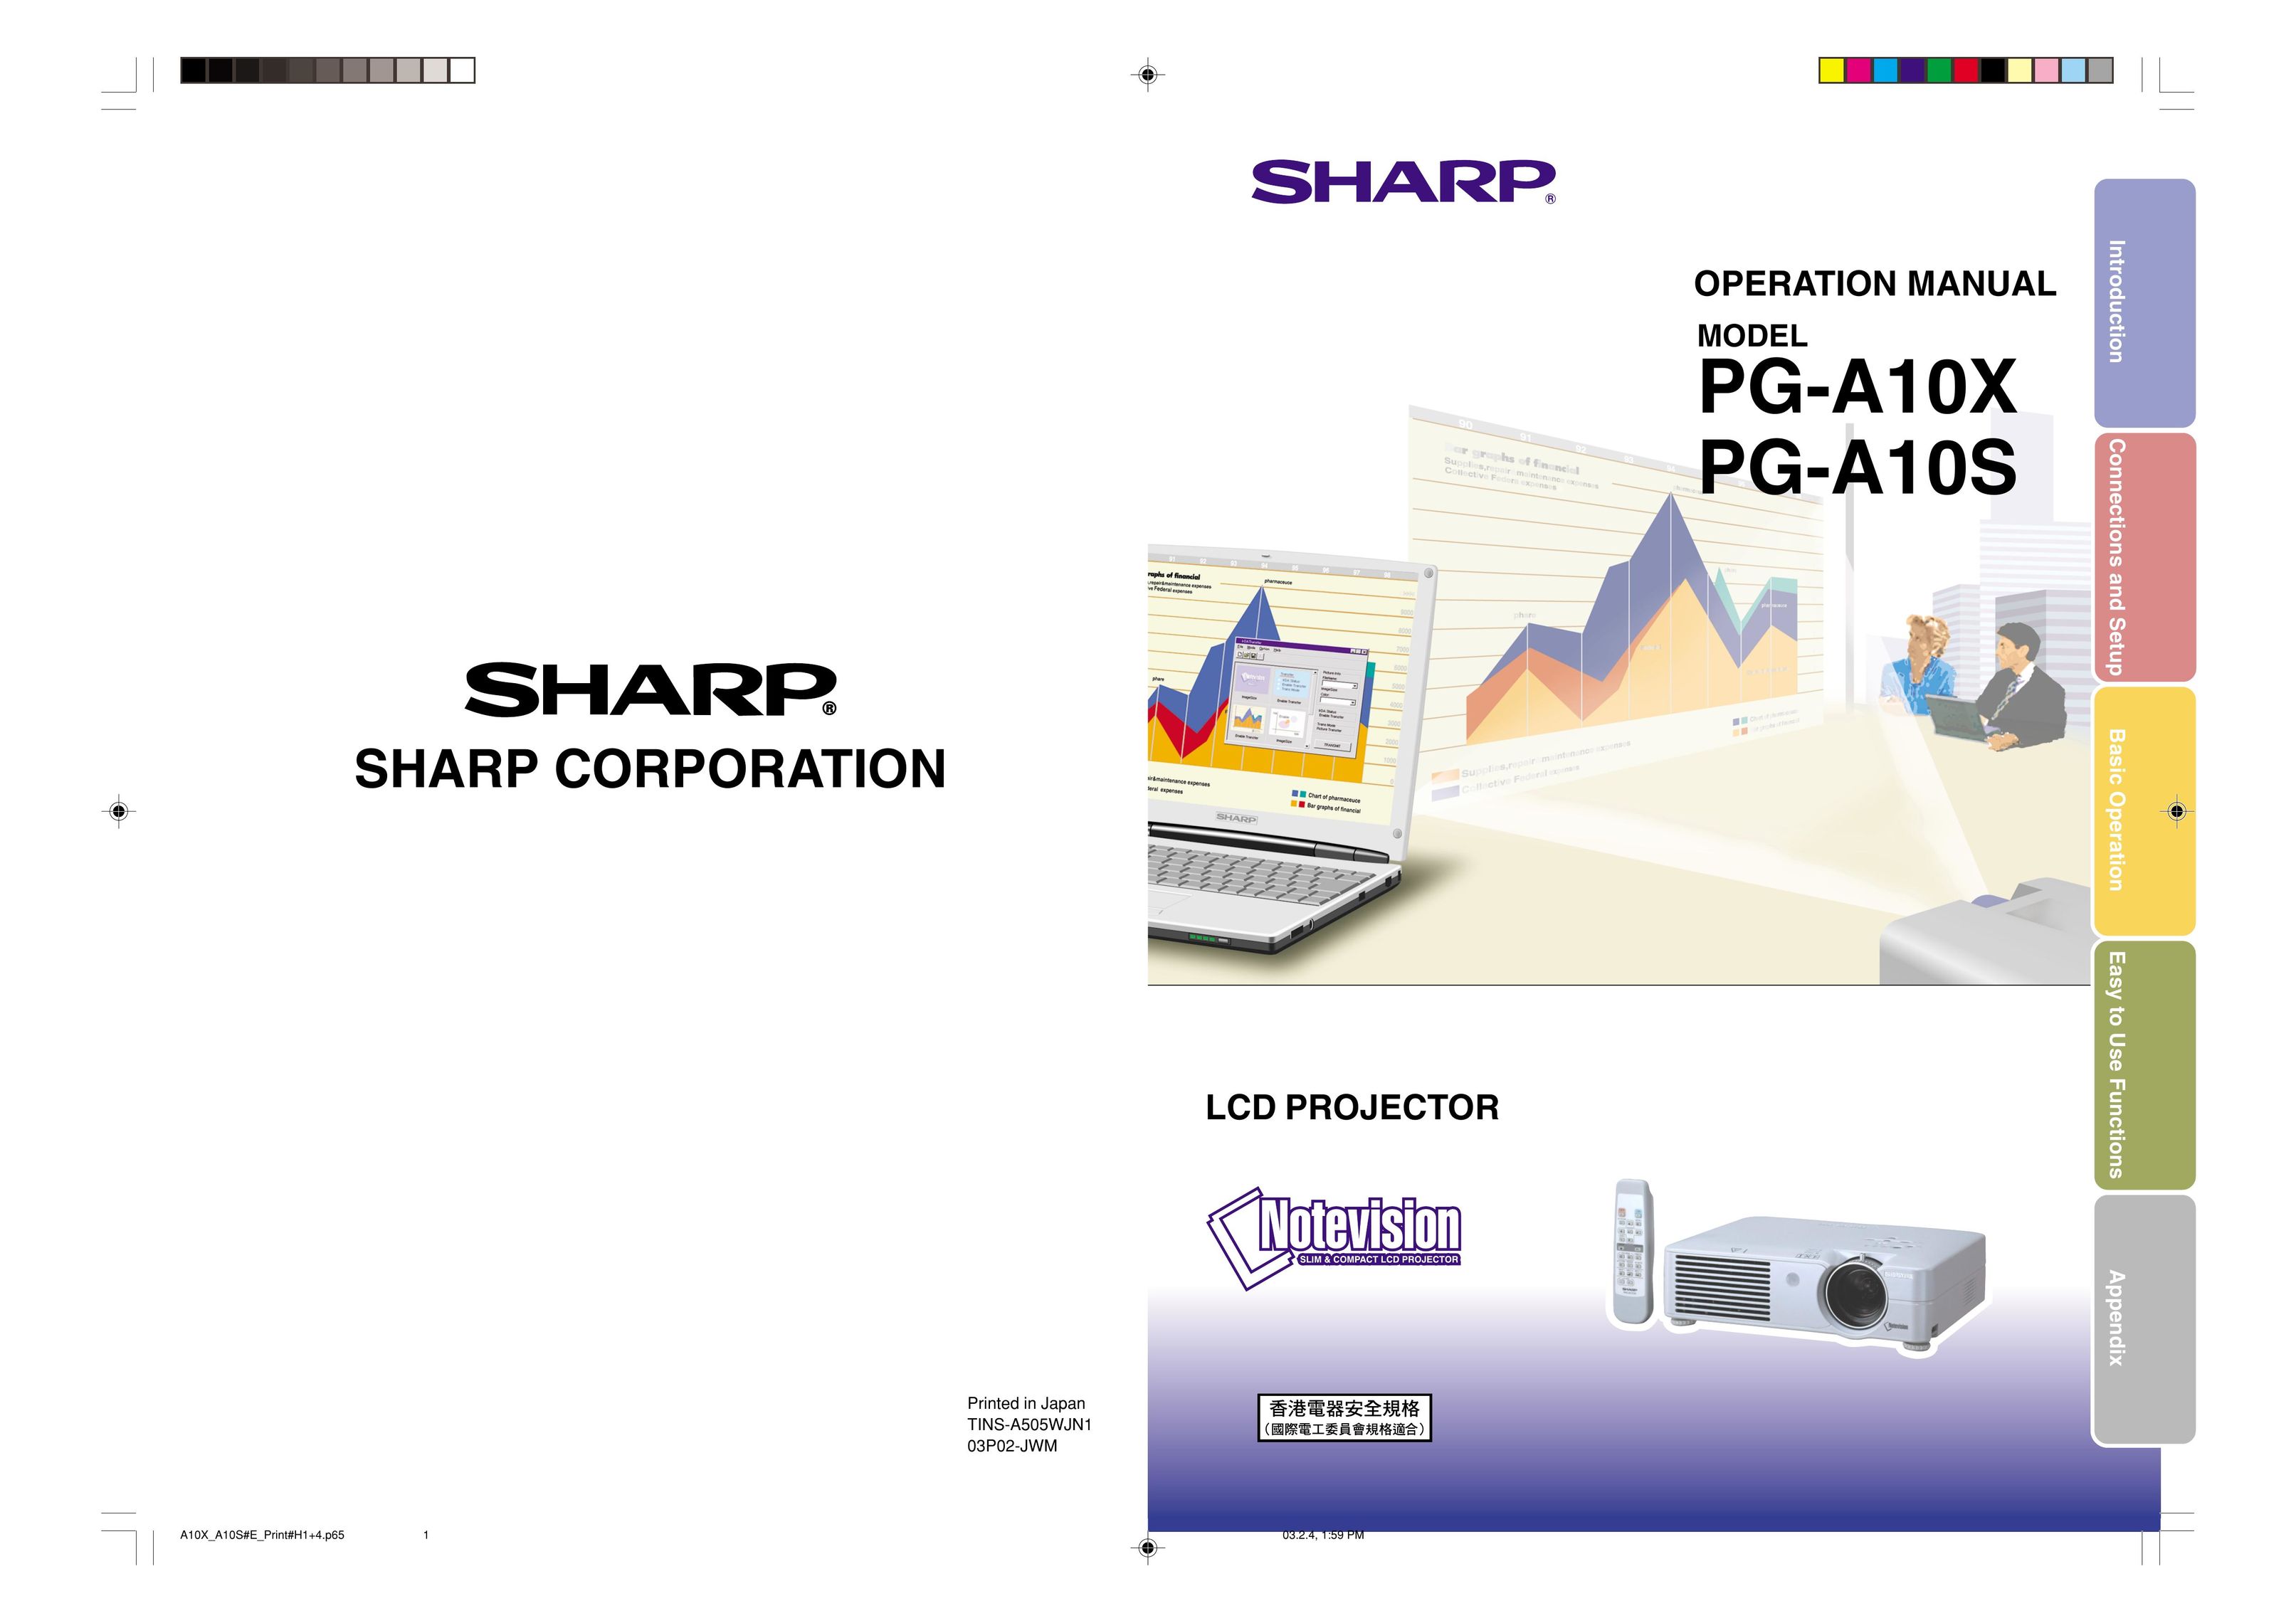 Sharp PG-A10S Projection Television User Manual